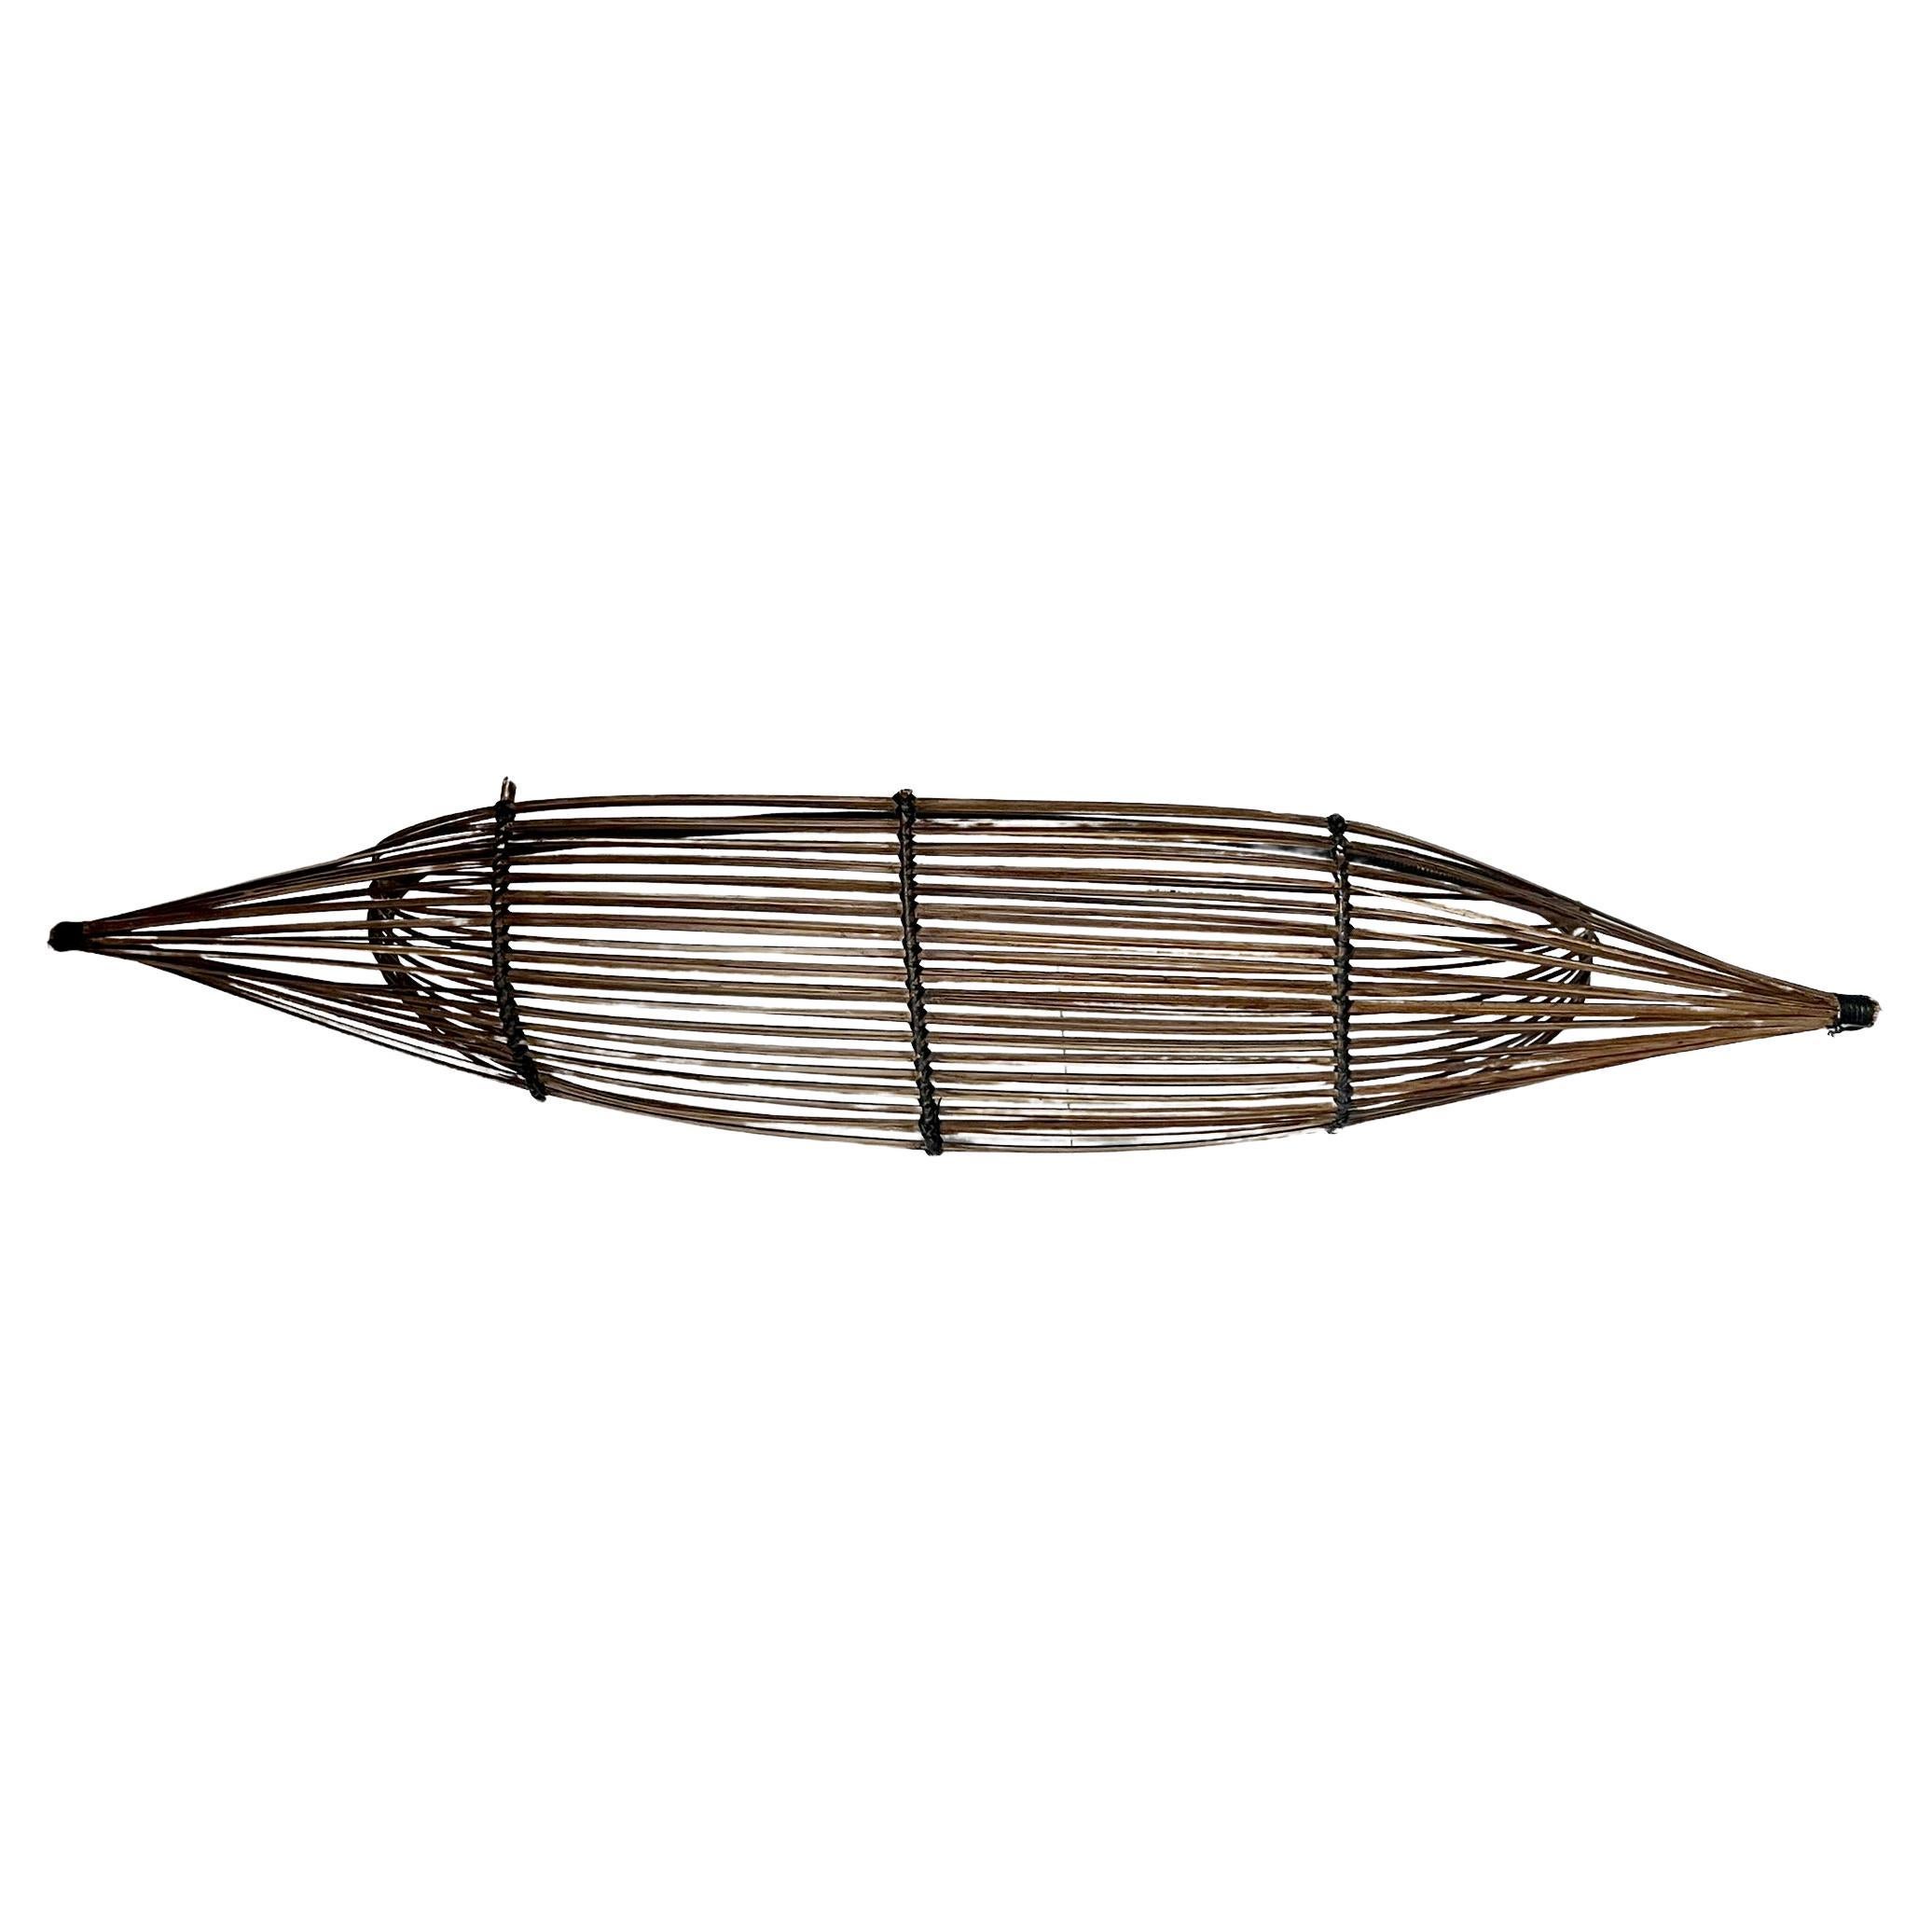 Asian Modern Handmade Willow and Cane Canoe Basket with Handle In Good Condition For Sale In Palm Springs, CA